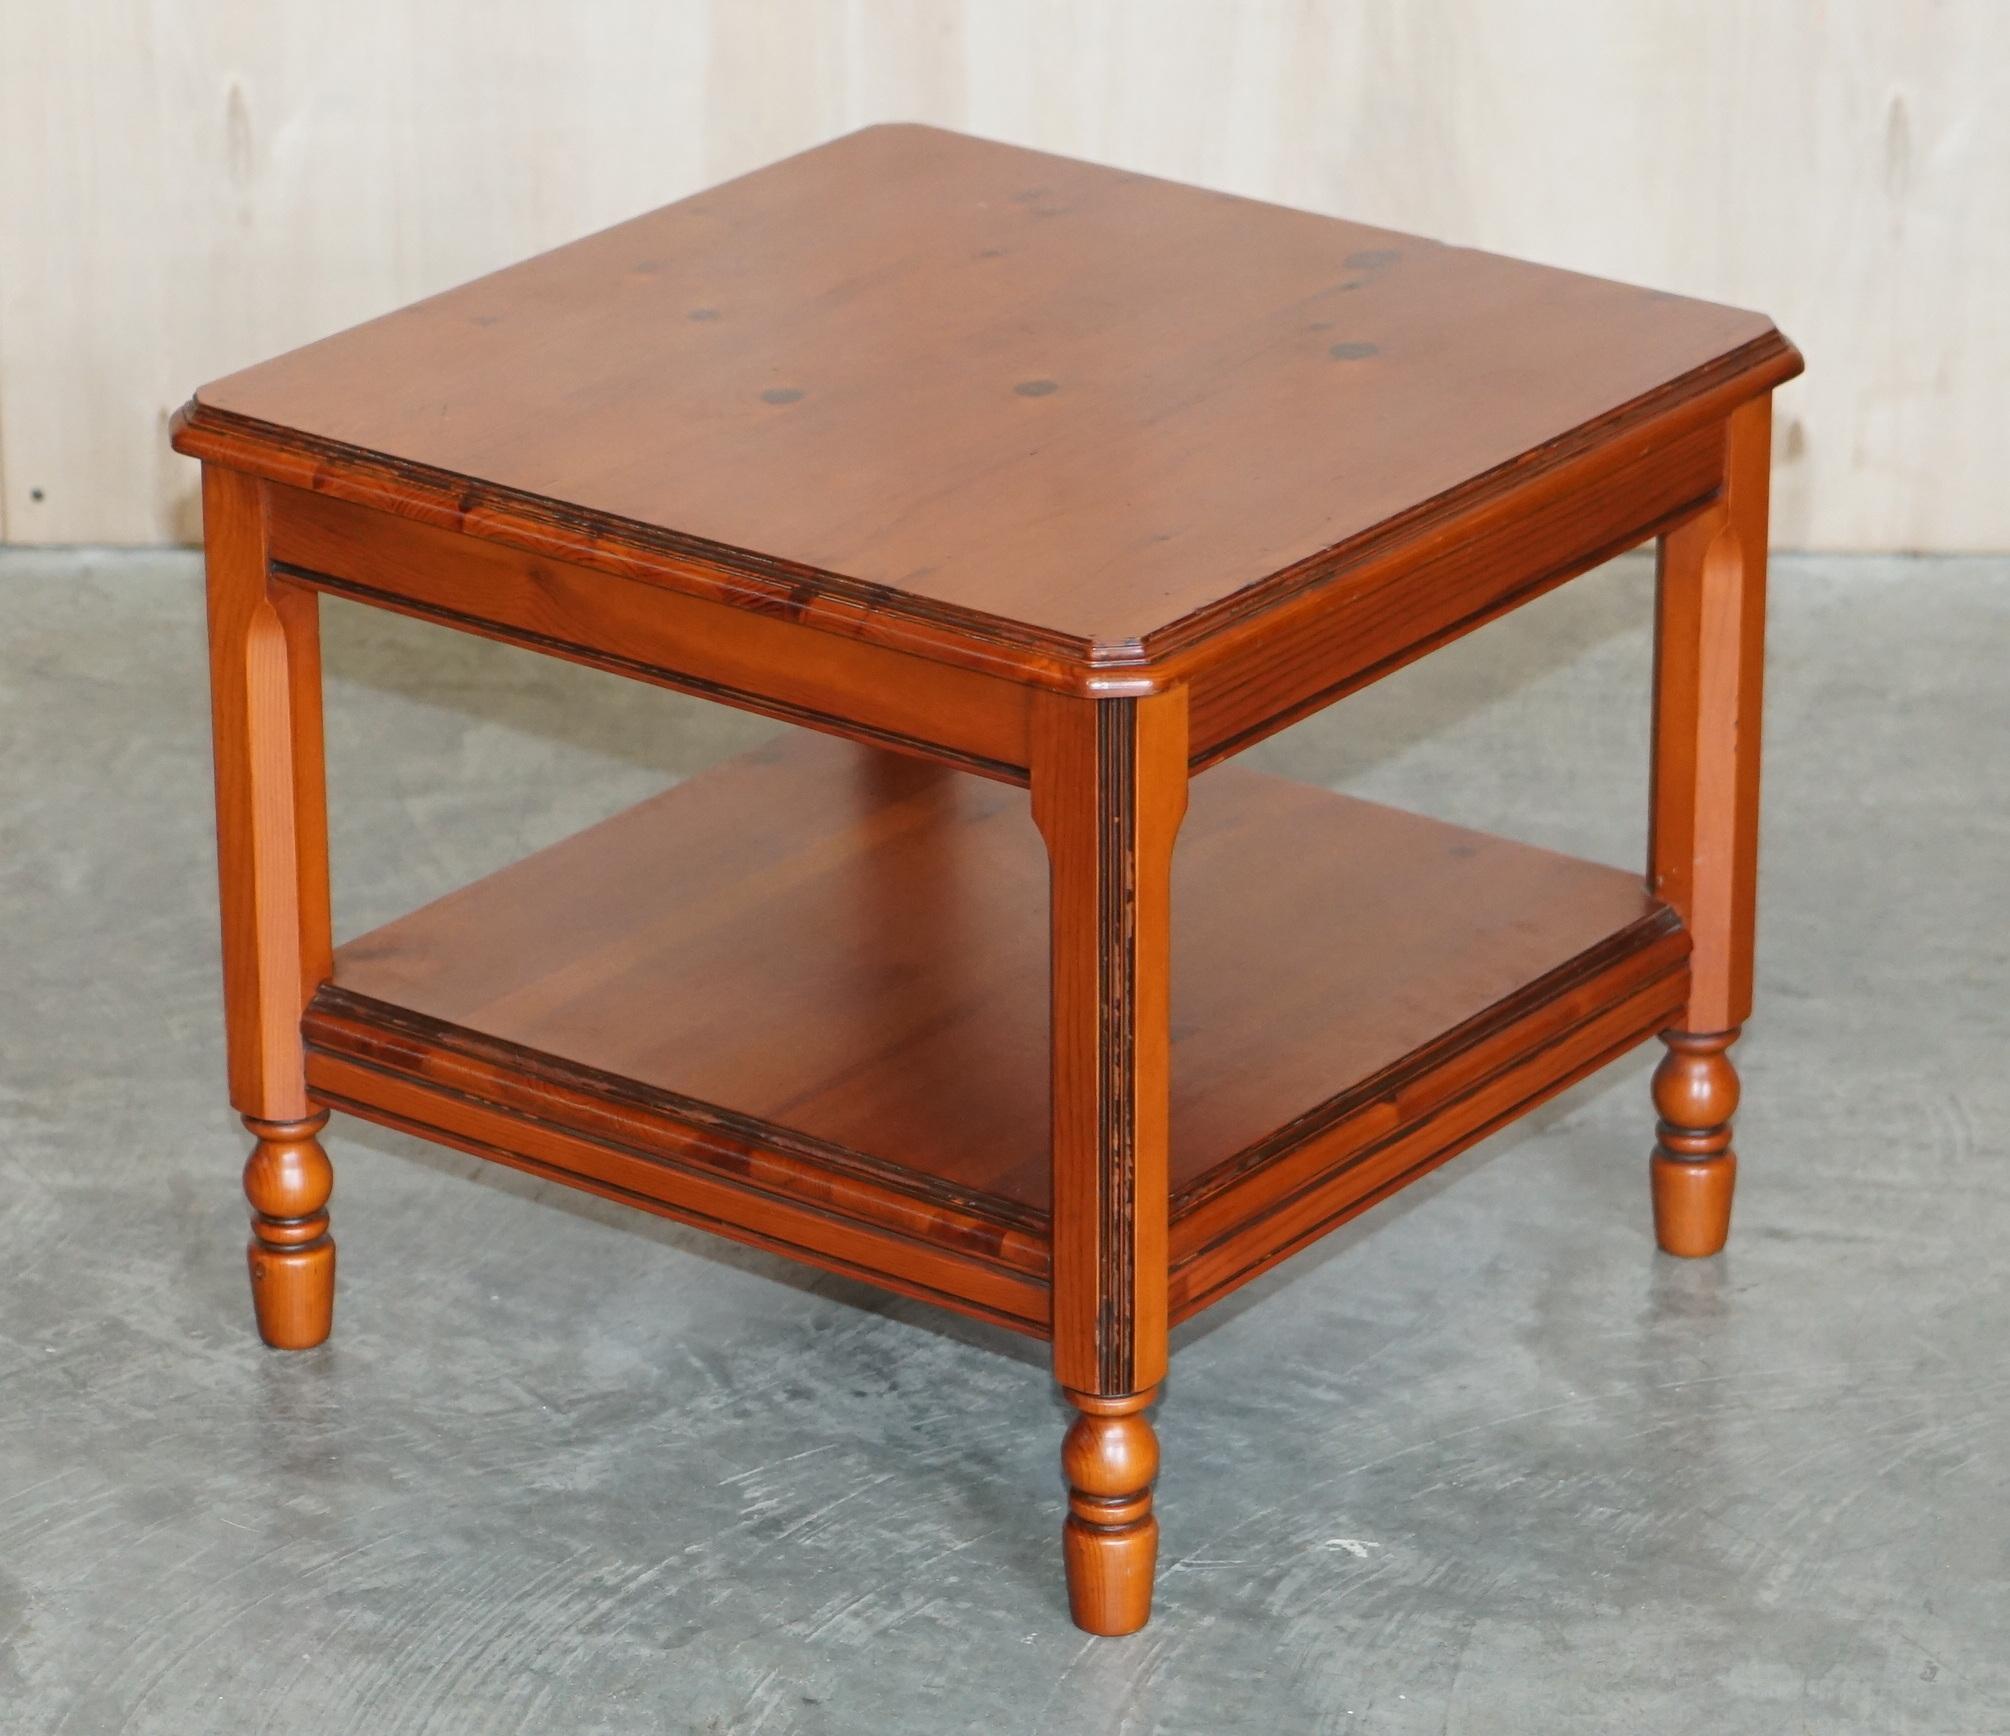 We are delighted to offer for sale this lovely vintage knotty pine side end lamp wine table 

A good looking well made and decorative table, it has a nice vintage patina to it and works well in any setting

We have cleaned waxed and polished it